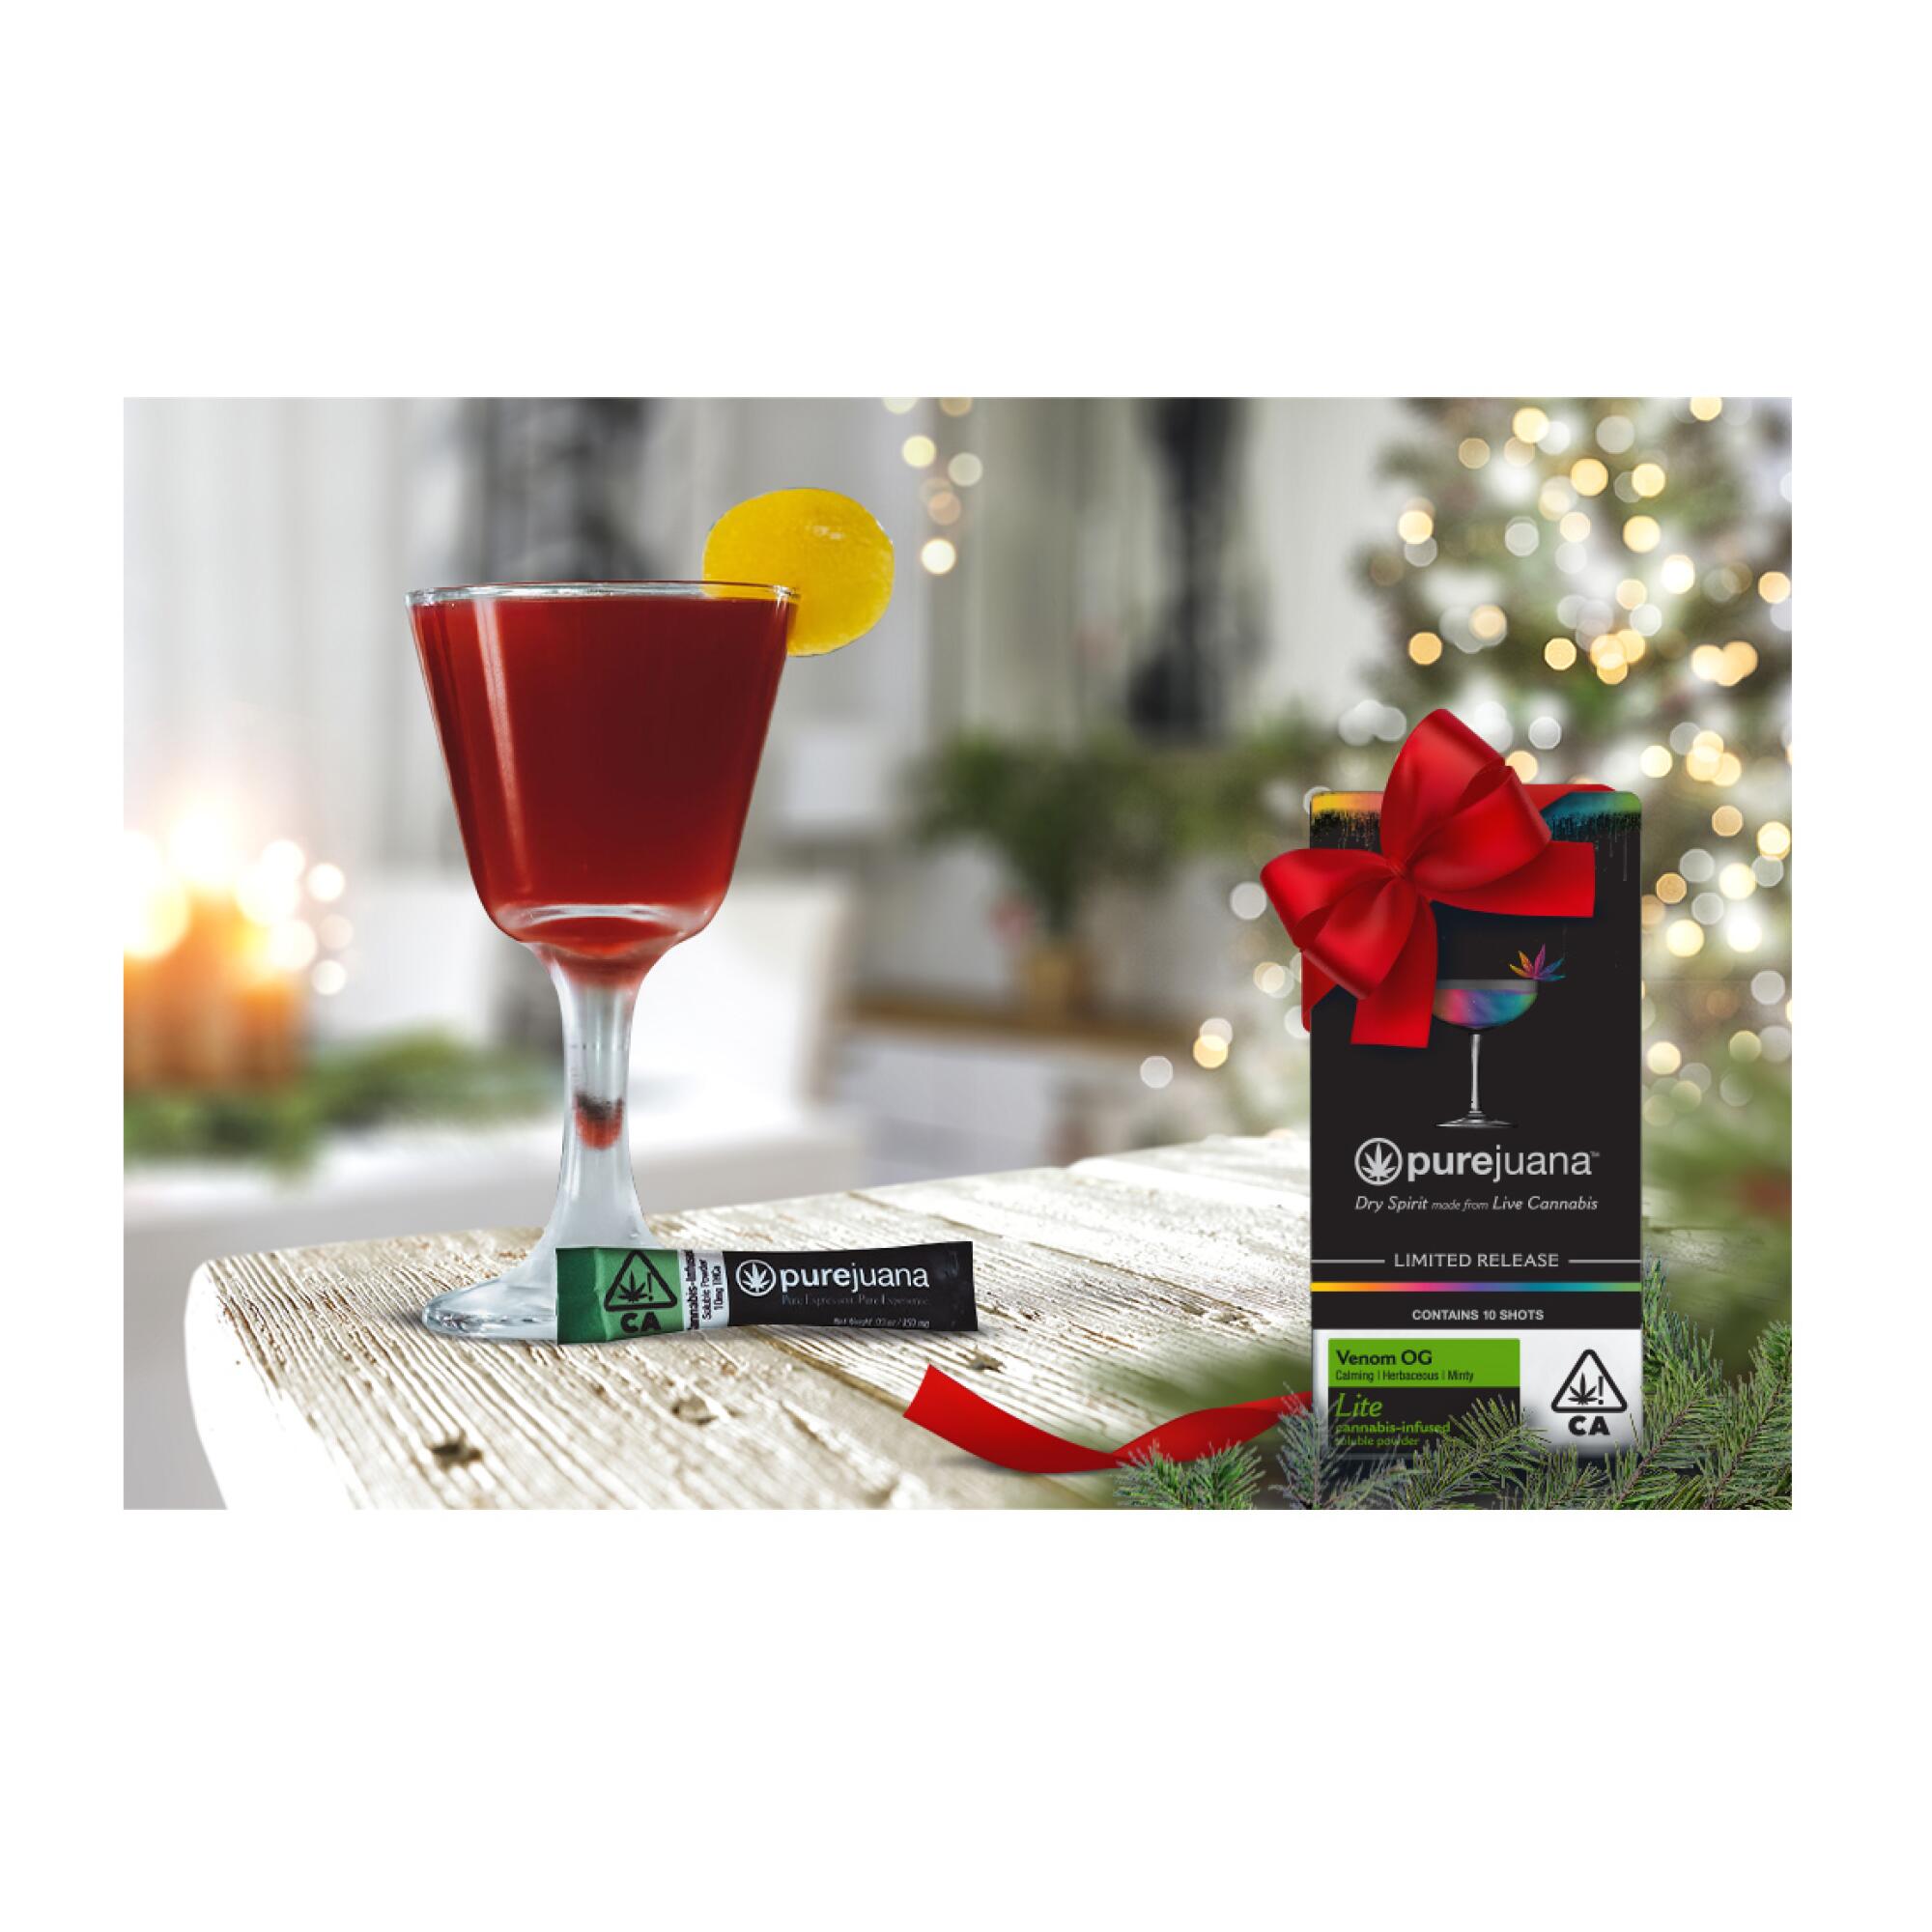 A glass filled with red liquid and a box with a bow against a holiday backdrop.